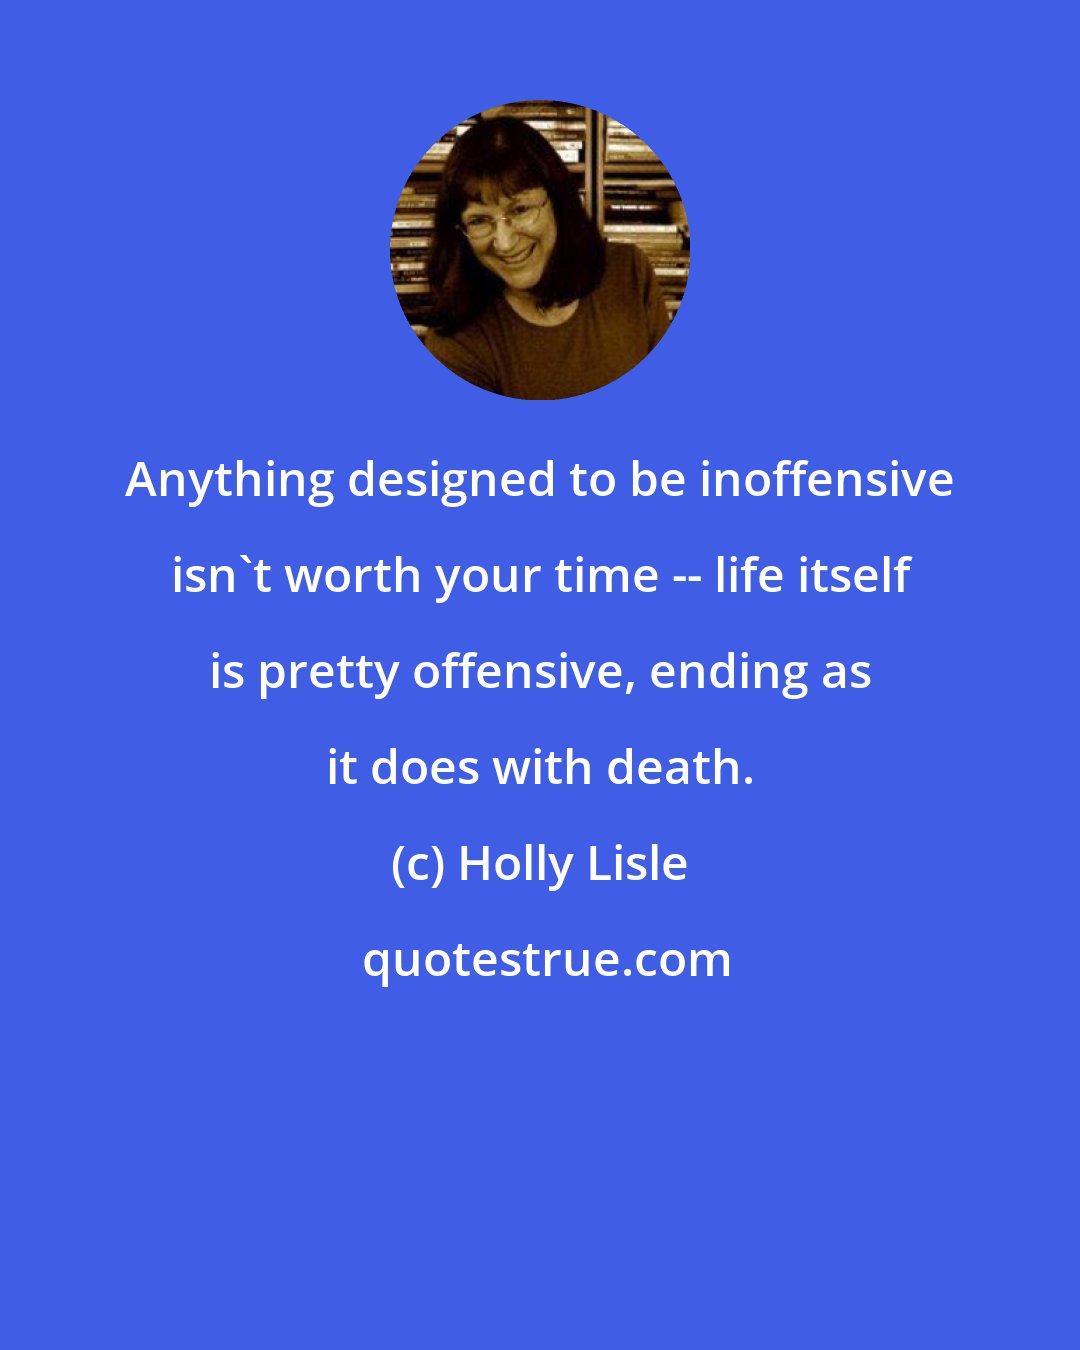 Holly Lisle: Anything designed to be inoffensive isn't worth your time -- life itself is pretty offensive, ending as it does with death.